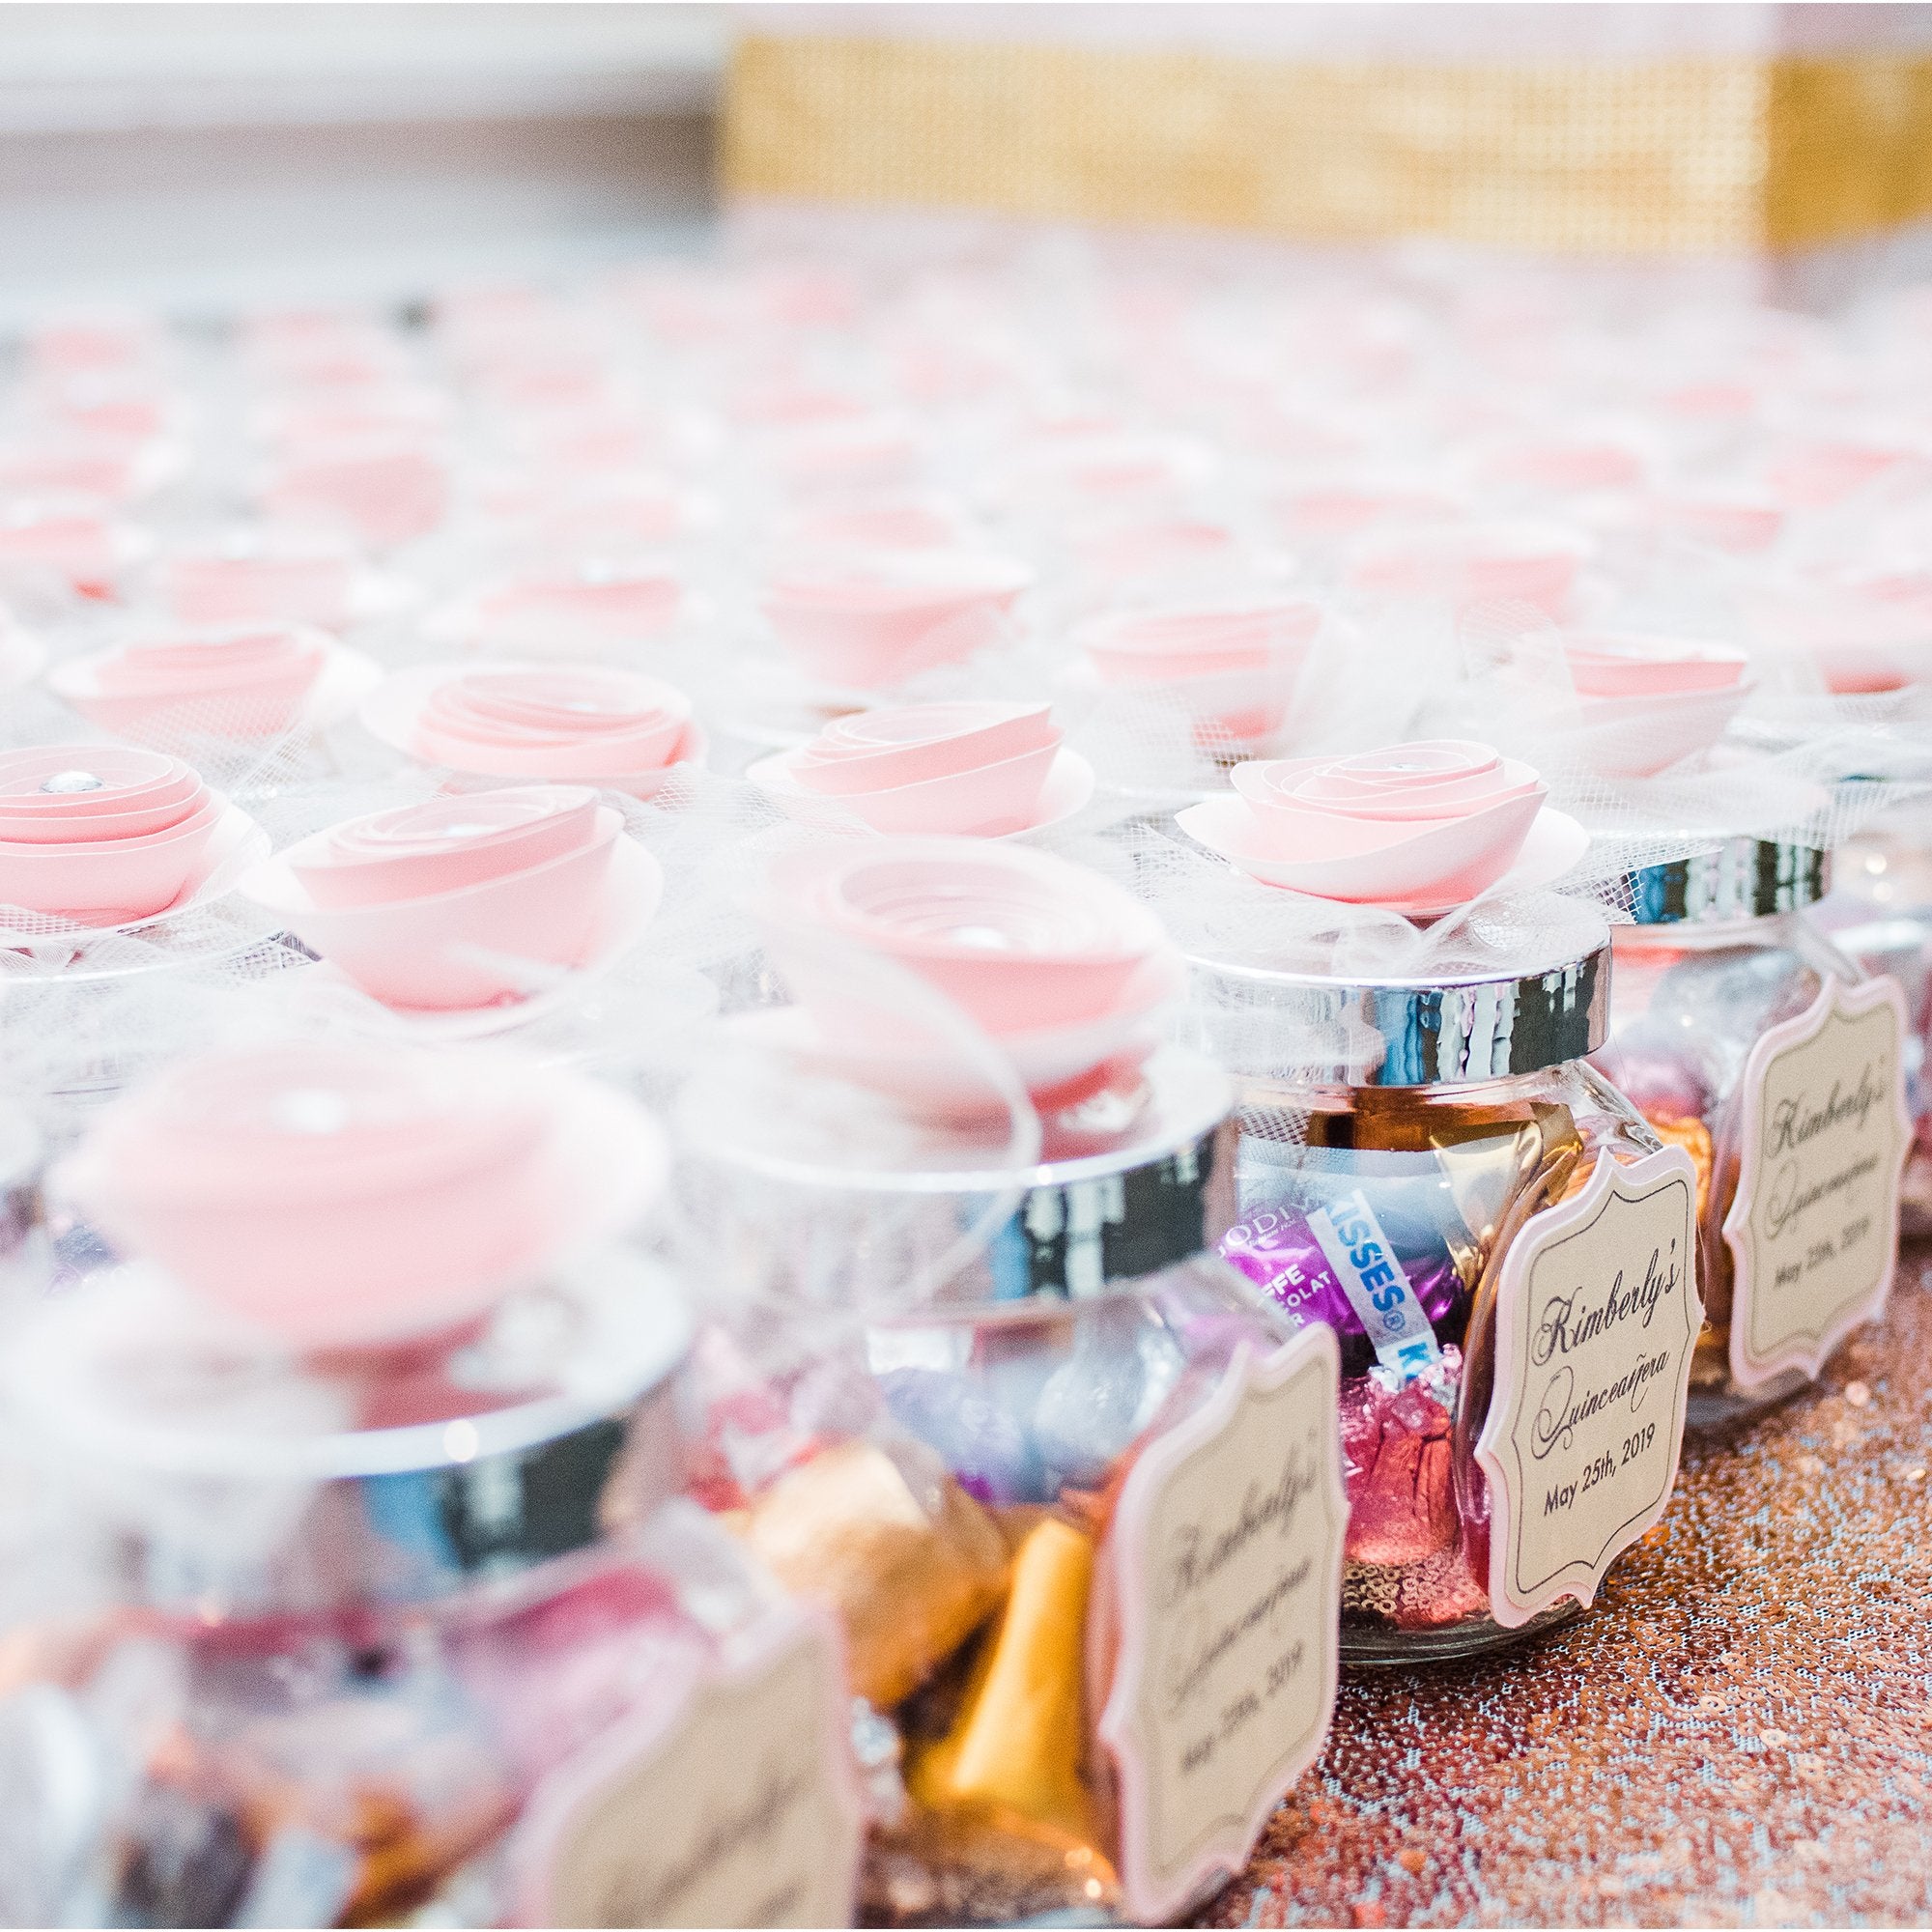 Princess Party Favors Jar For Sweet Sixteen, Quinceanera, Baby Shower